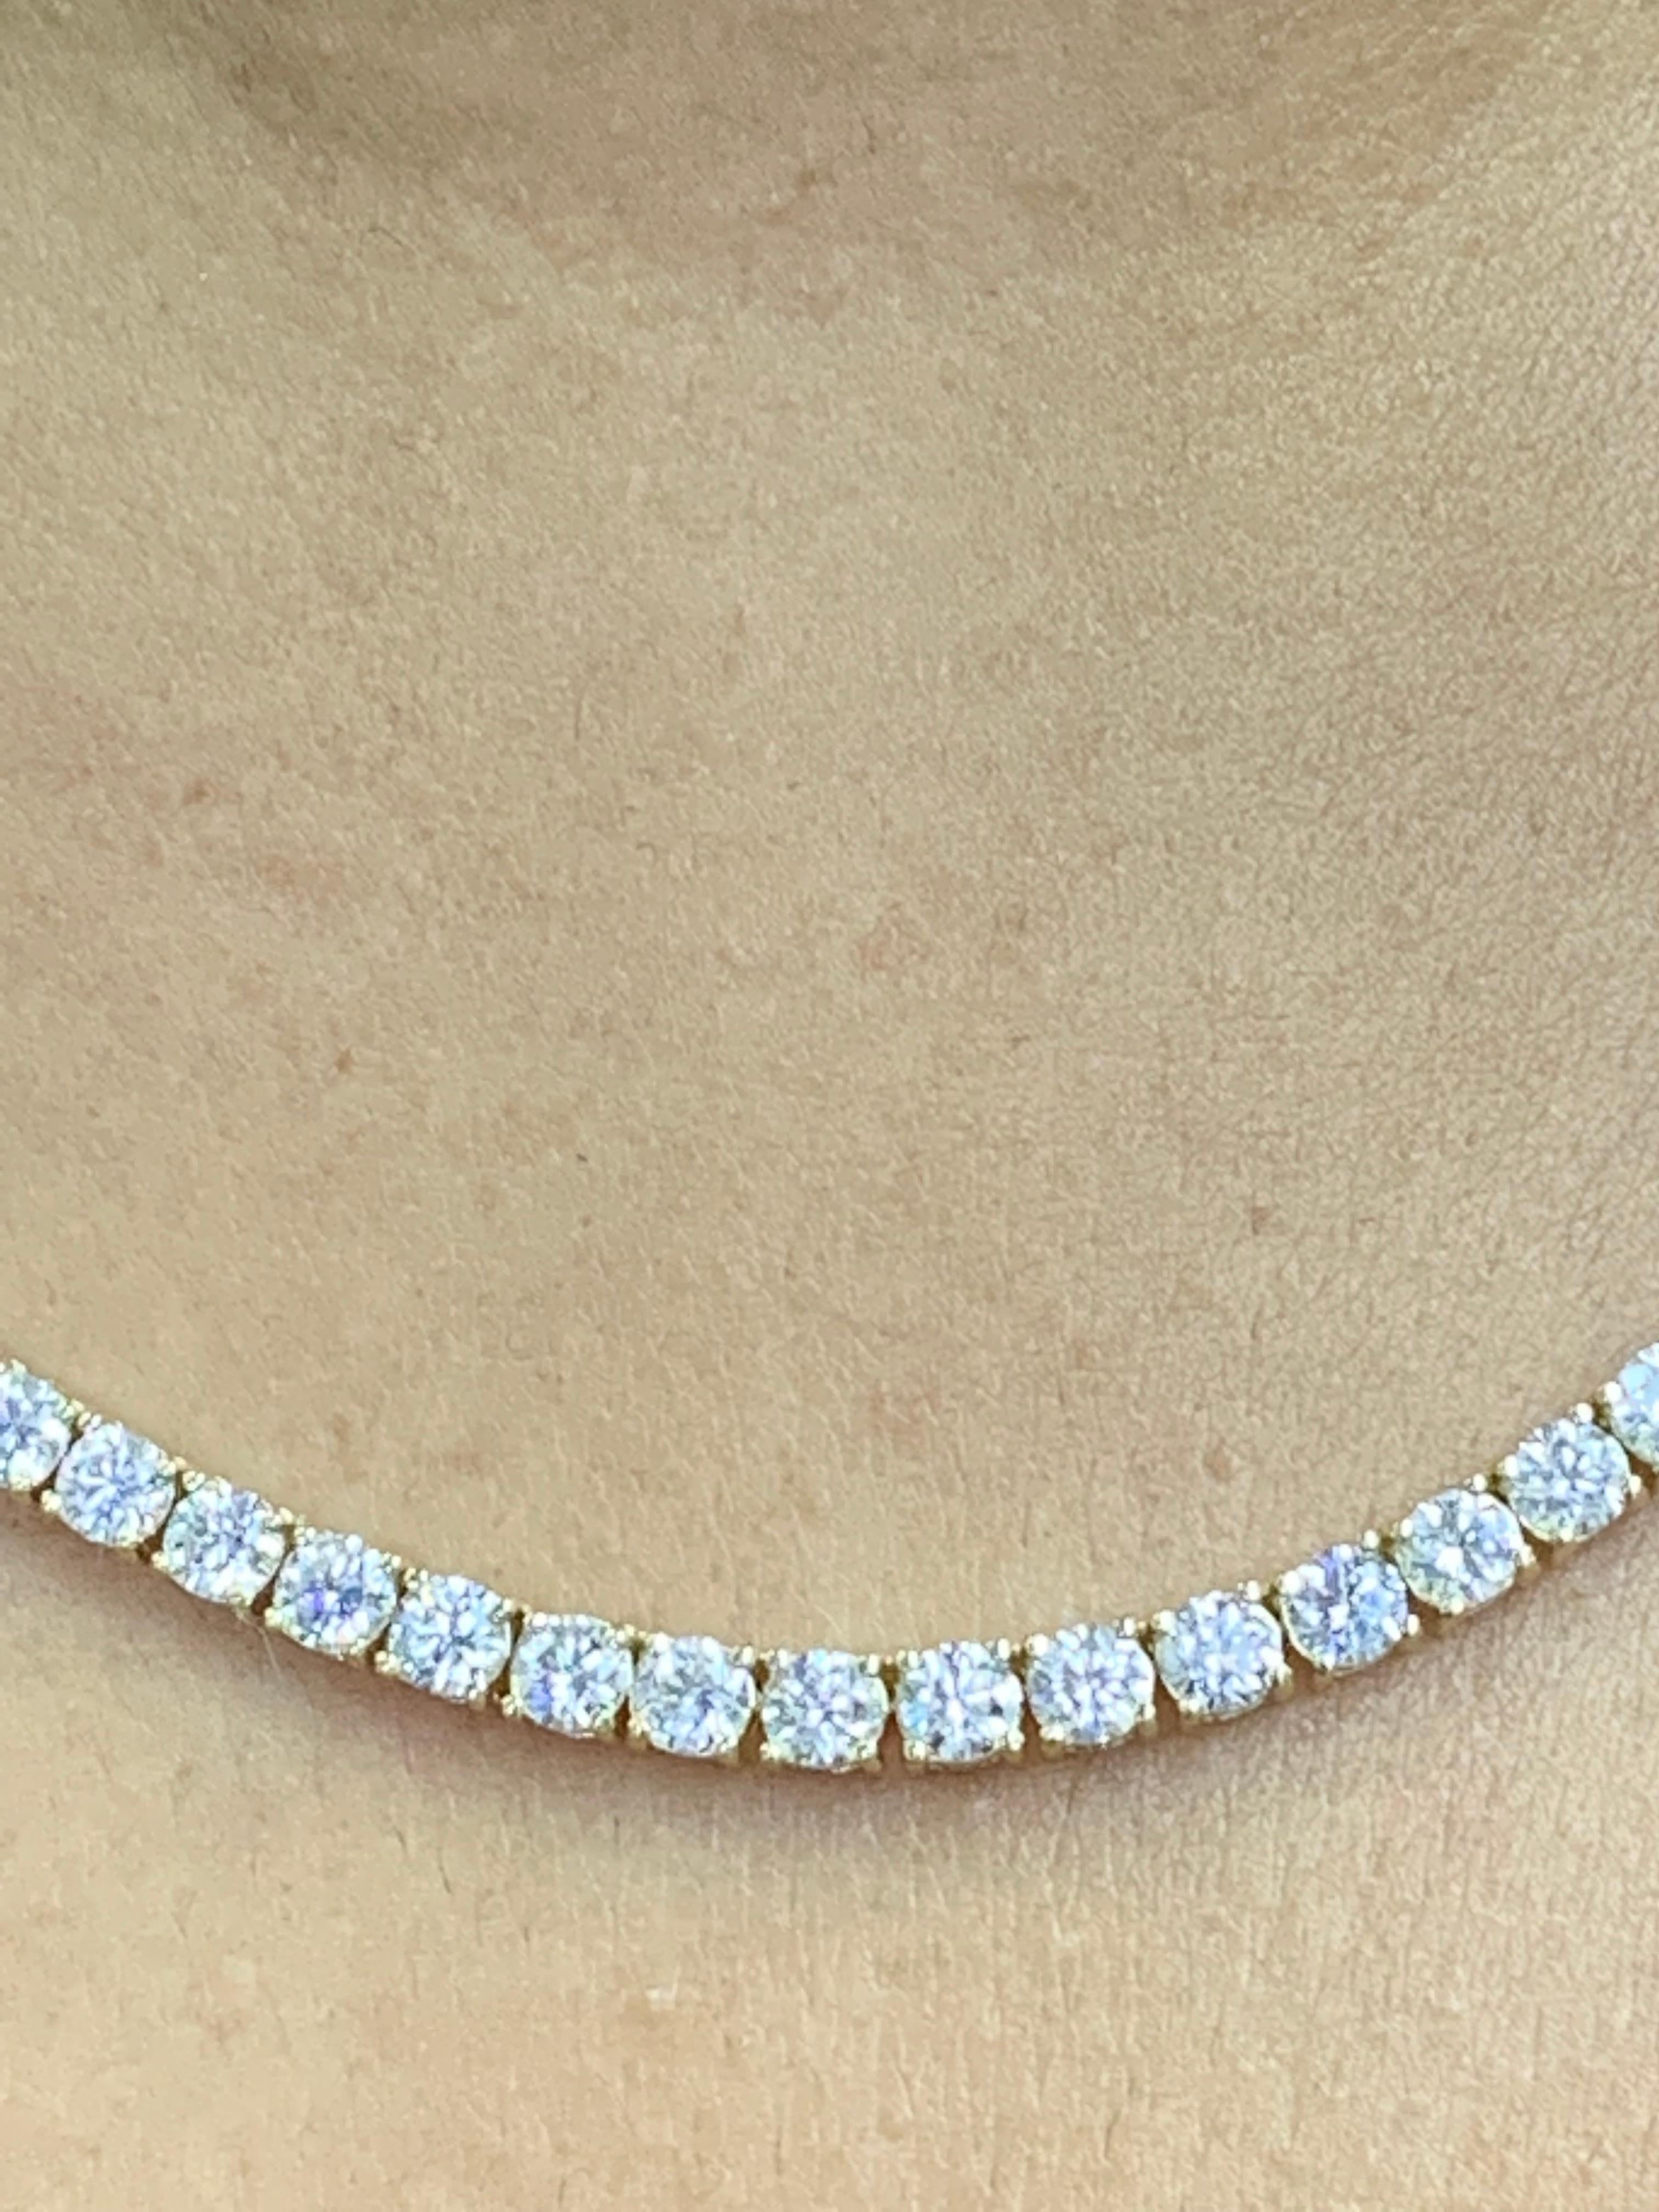 Brilliant Cut 18 Carat Diamond Tennis Necklace in 14K Yellow Gold For Sale